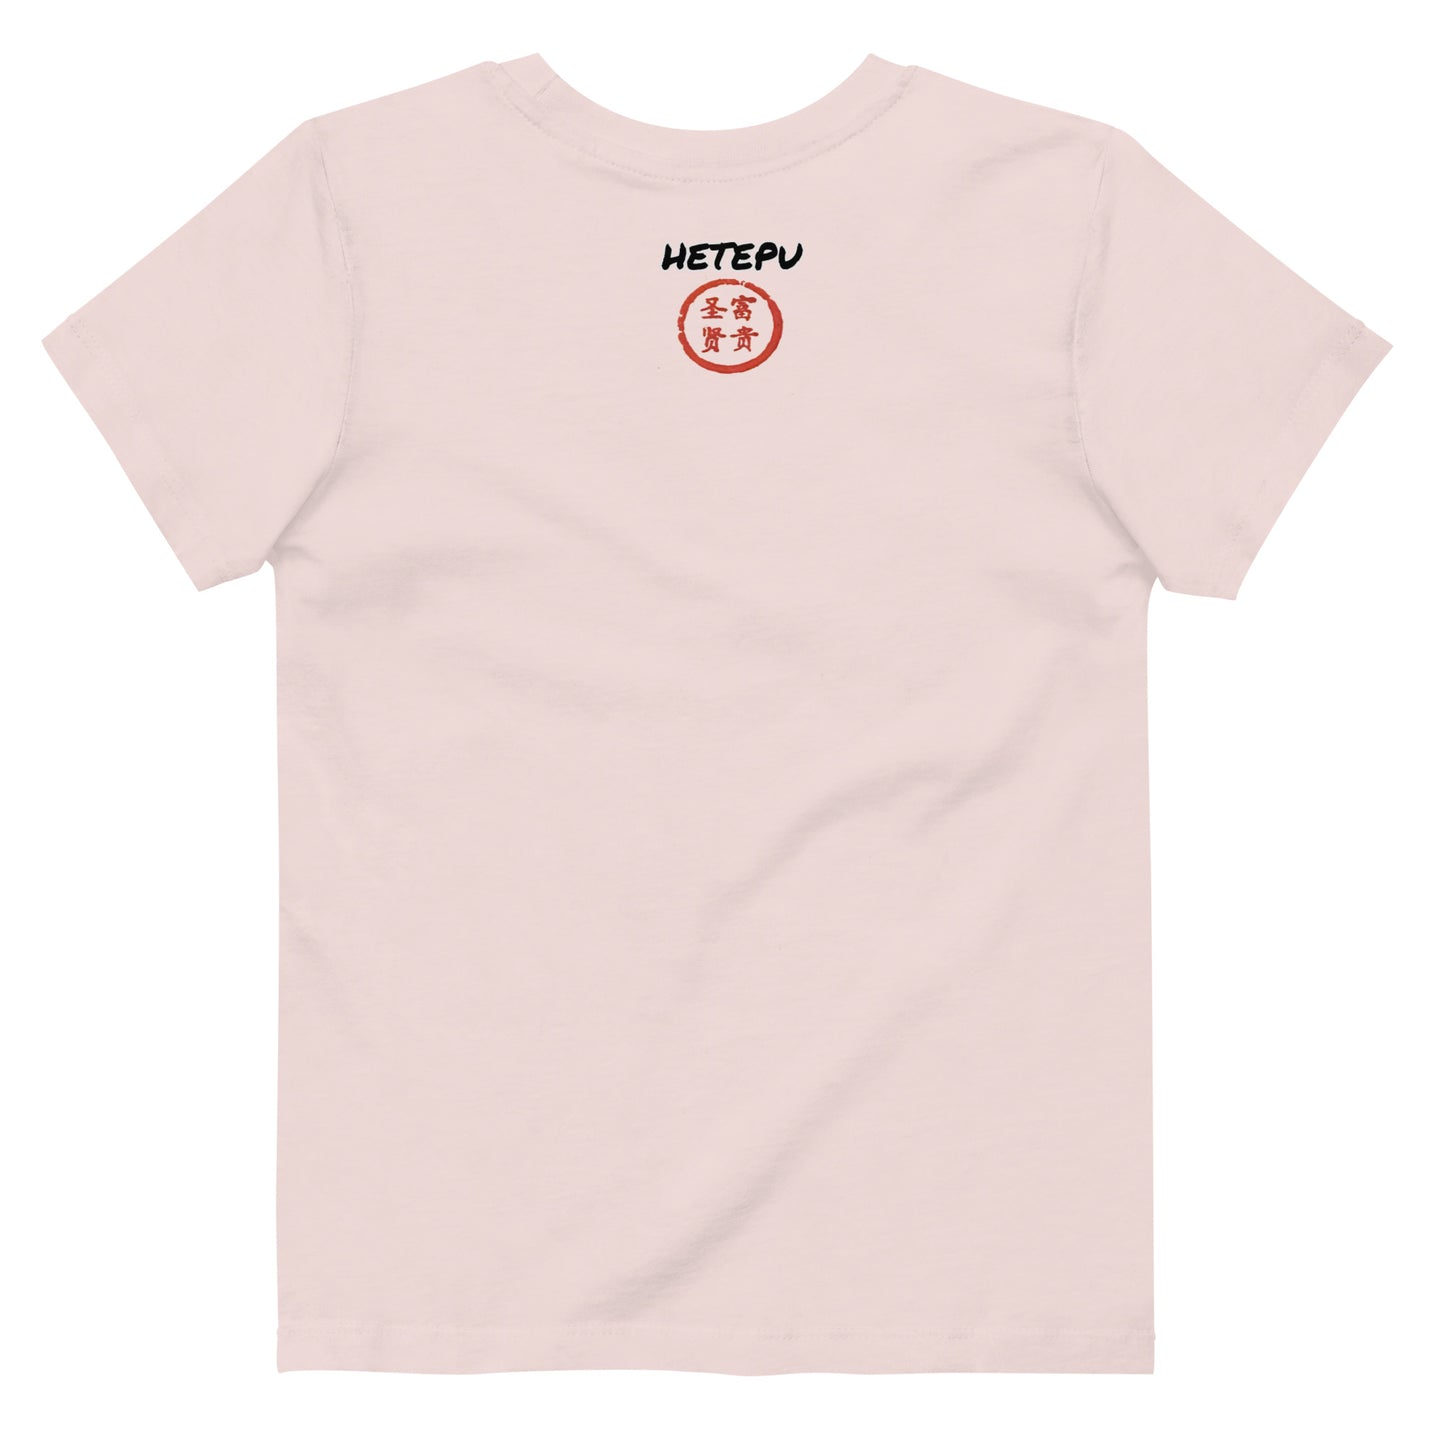 The Hibiscus Toddler's Tee